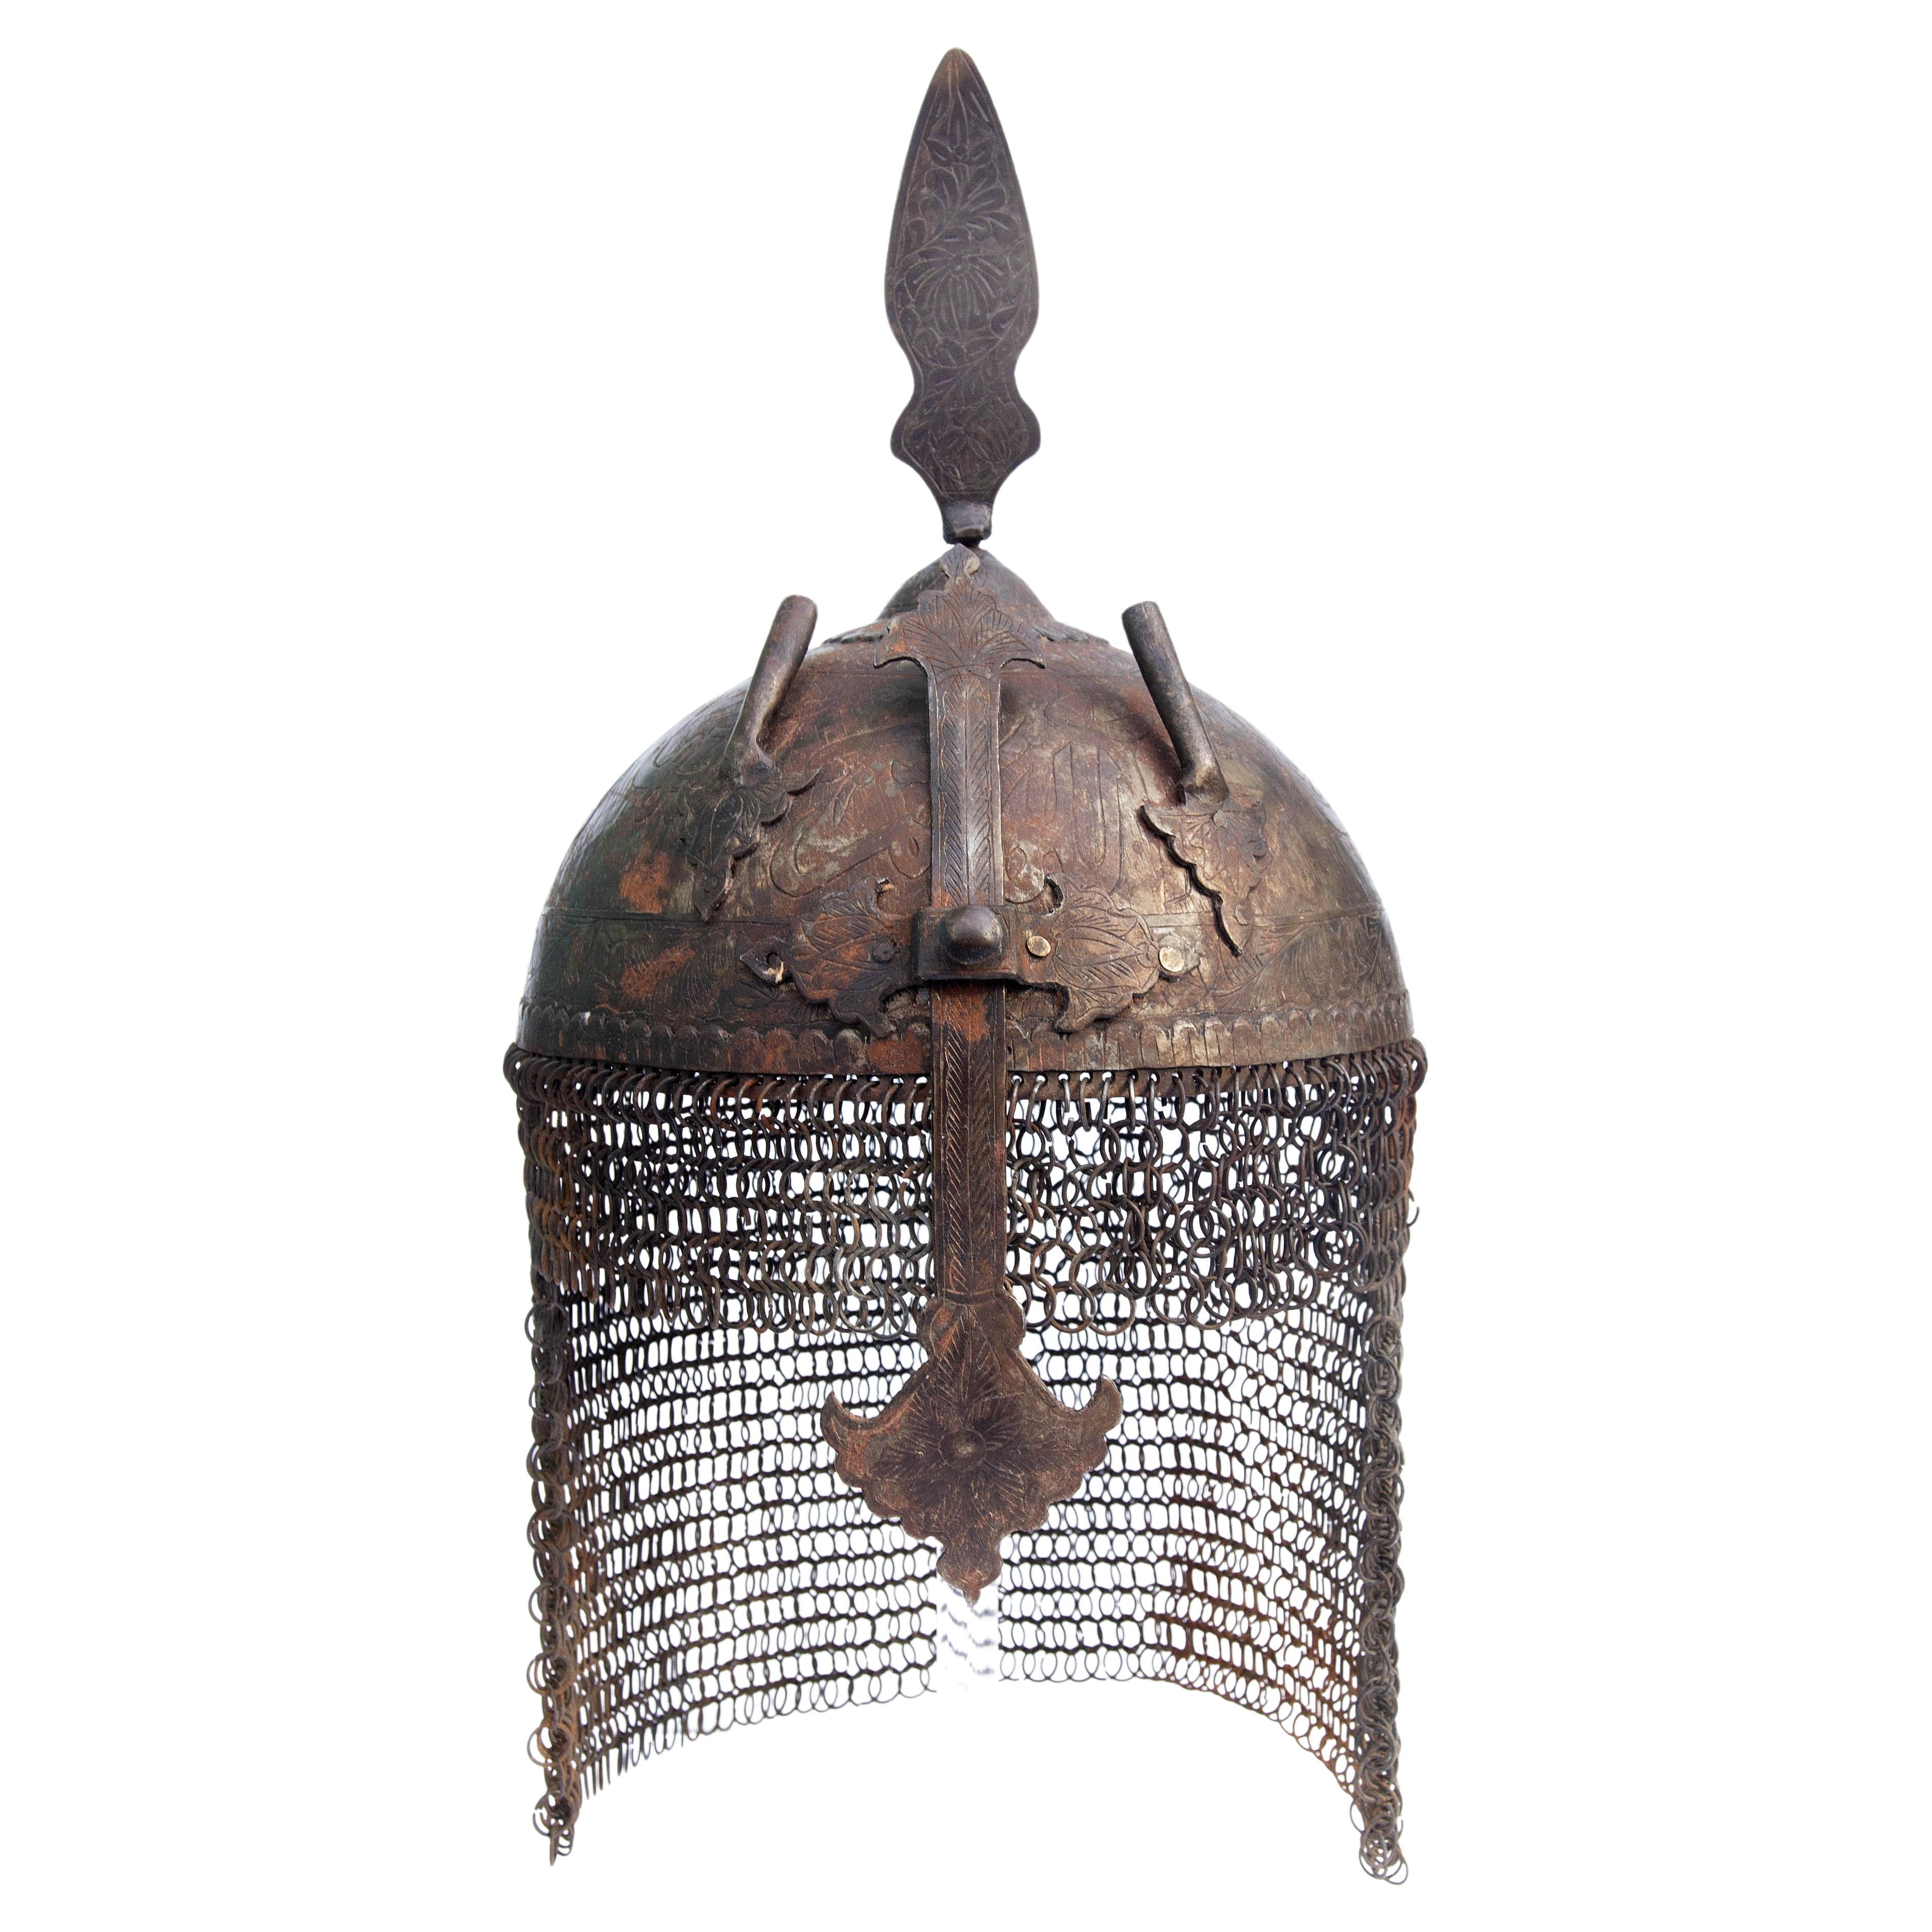 Islamic Persian iron helmet with chainmail. Engraved with Arabic symbols